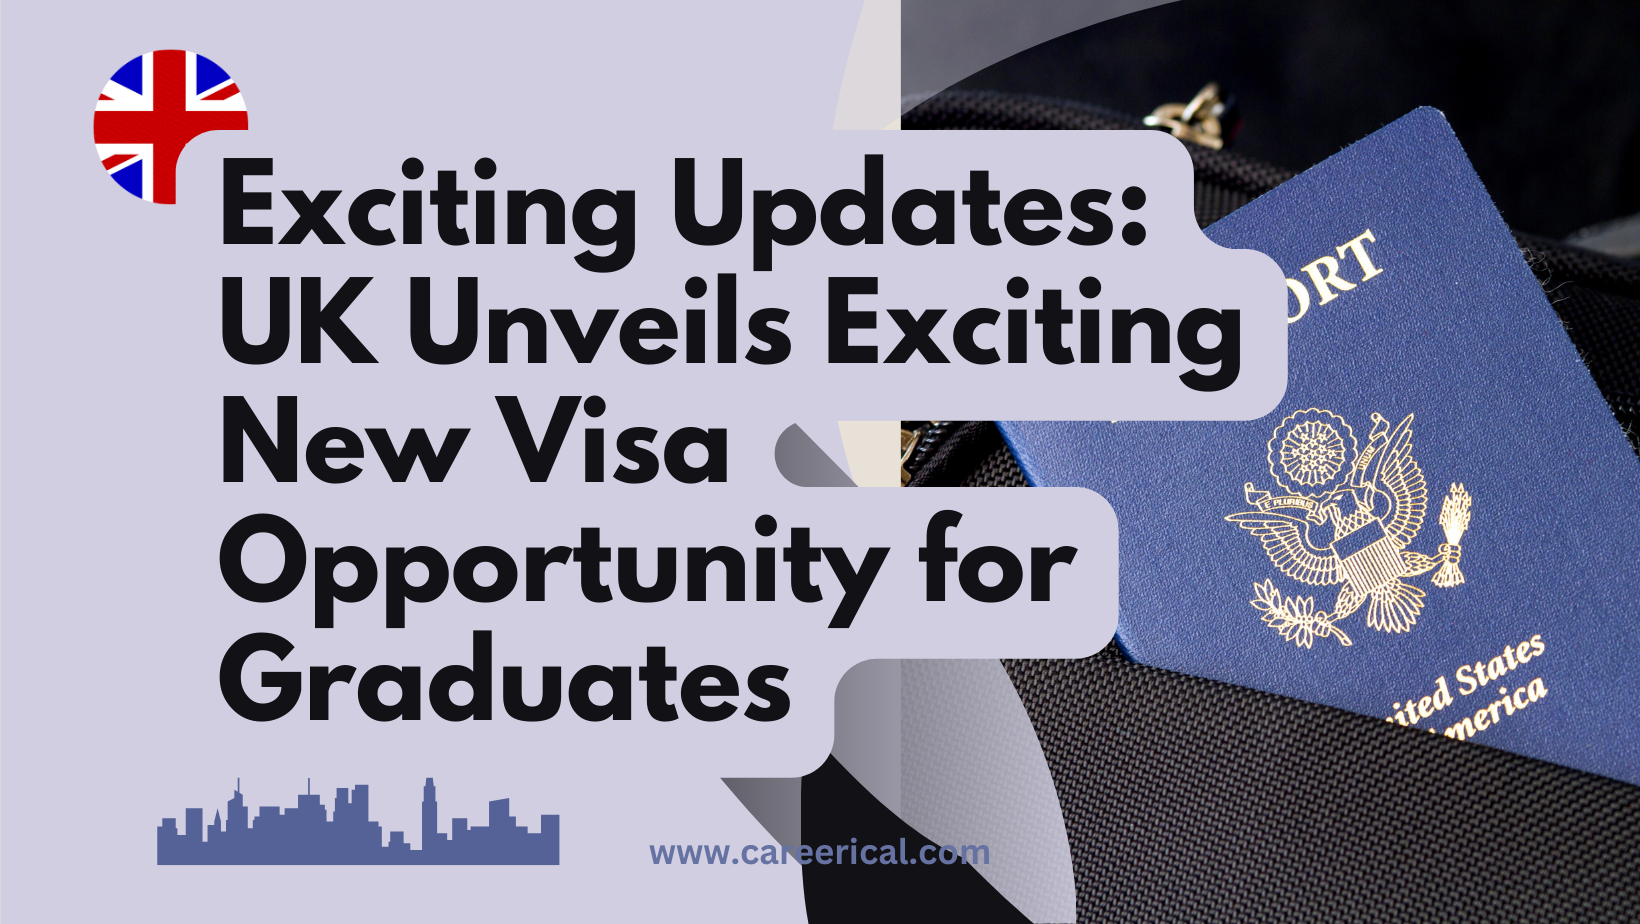 Exciting Updates UK Unveils Exciting New Visa Opportunity for Graduates